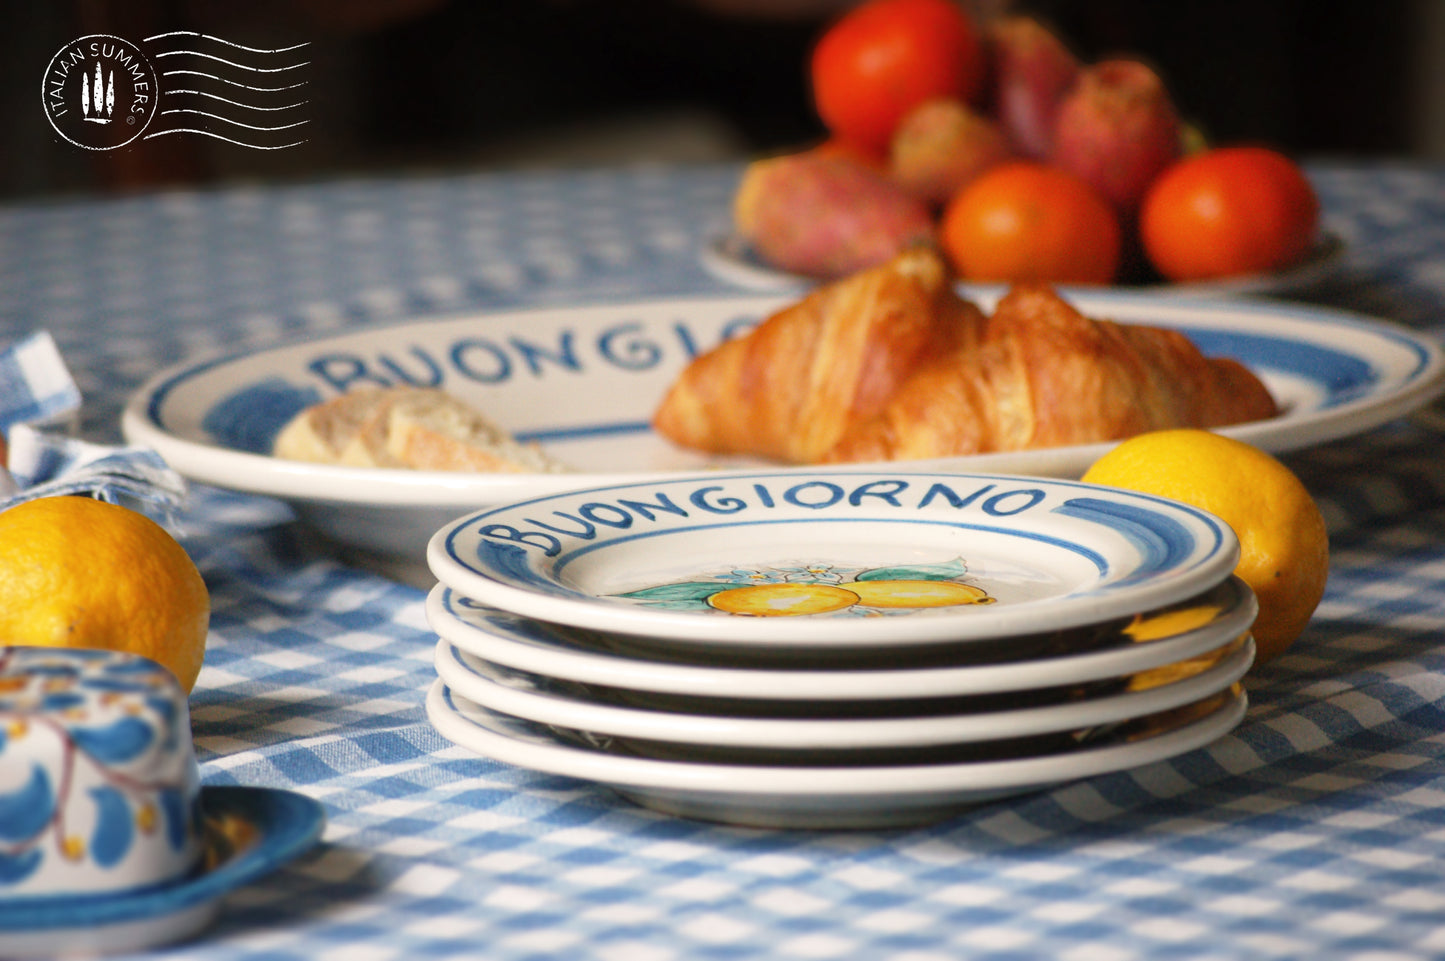 Ceramic plate Buongiorno Limoni handpainted in Sicily. This  plate has the quote Biongiorno on the rim - handpainted  - And colorfull lemons on the center of the plate  with lemon flowers. On the rim of the plate there are blue paint stripes. The blue color is ultra marine. This plate is designed and sold by Italian Summers.